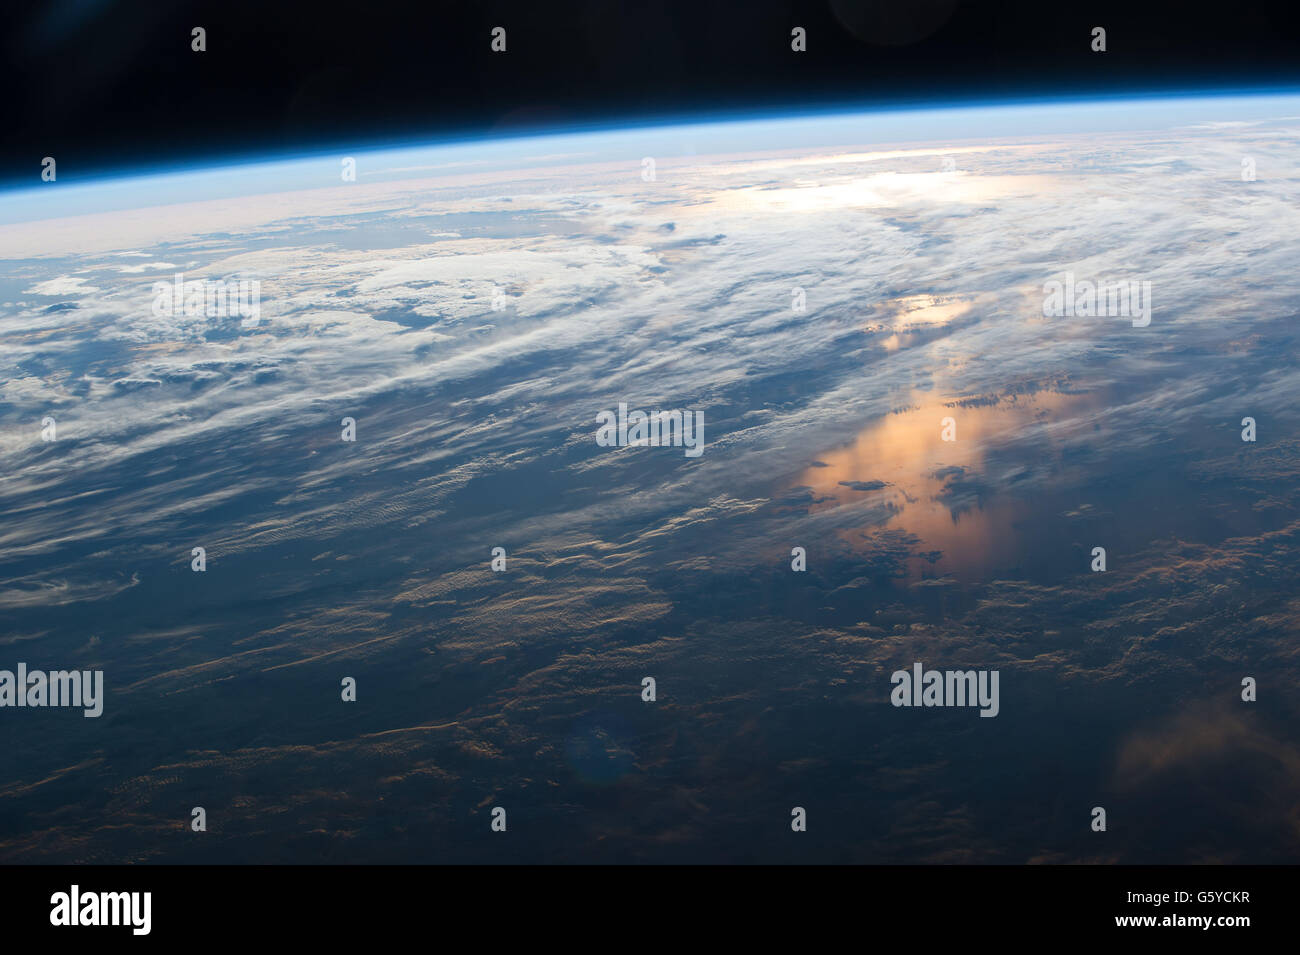 International Space Station Earth observation image captured by Expedition 48 crew members showing the sun reflecting off the ocean and the thin layer of atmosphere protecting the Earth from space. Stock Photo